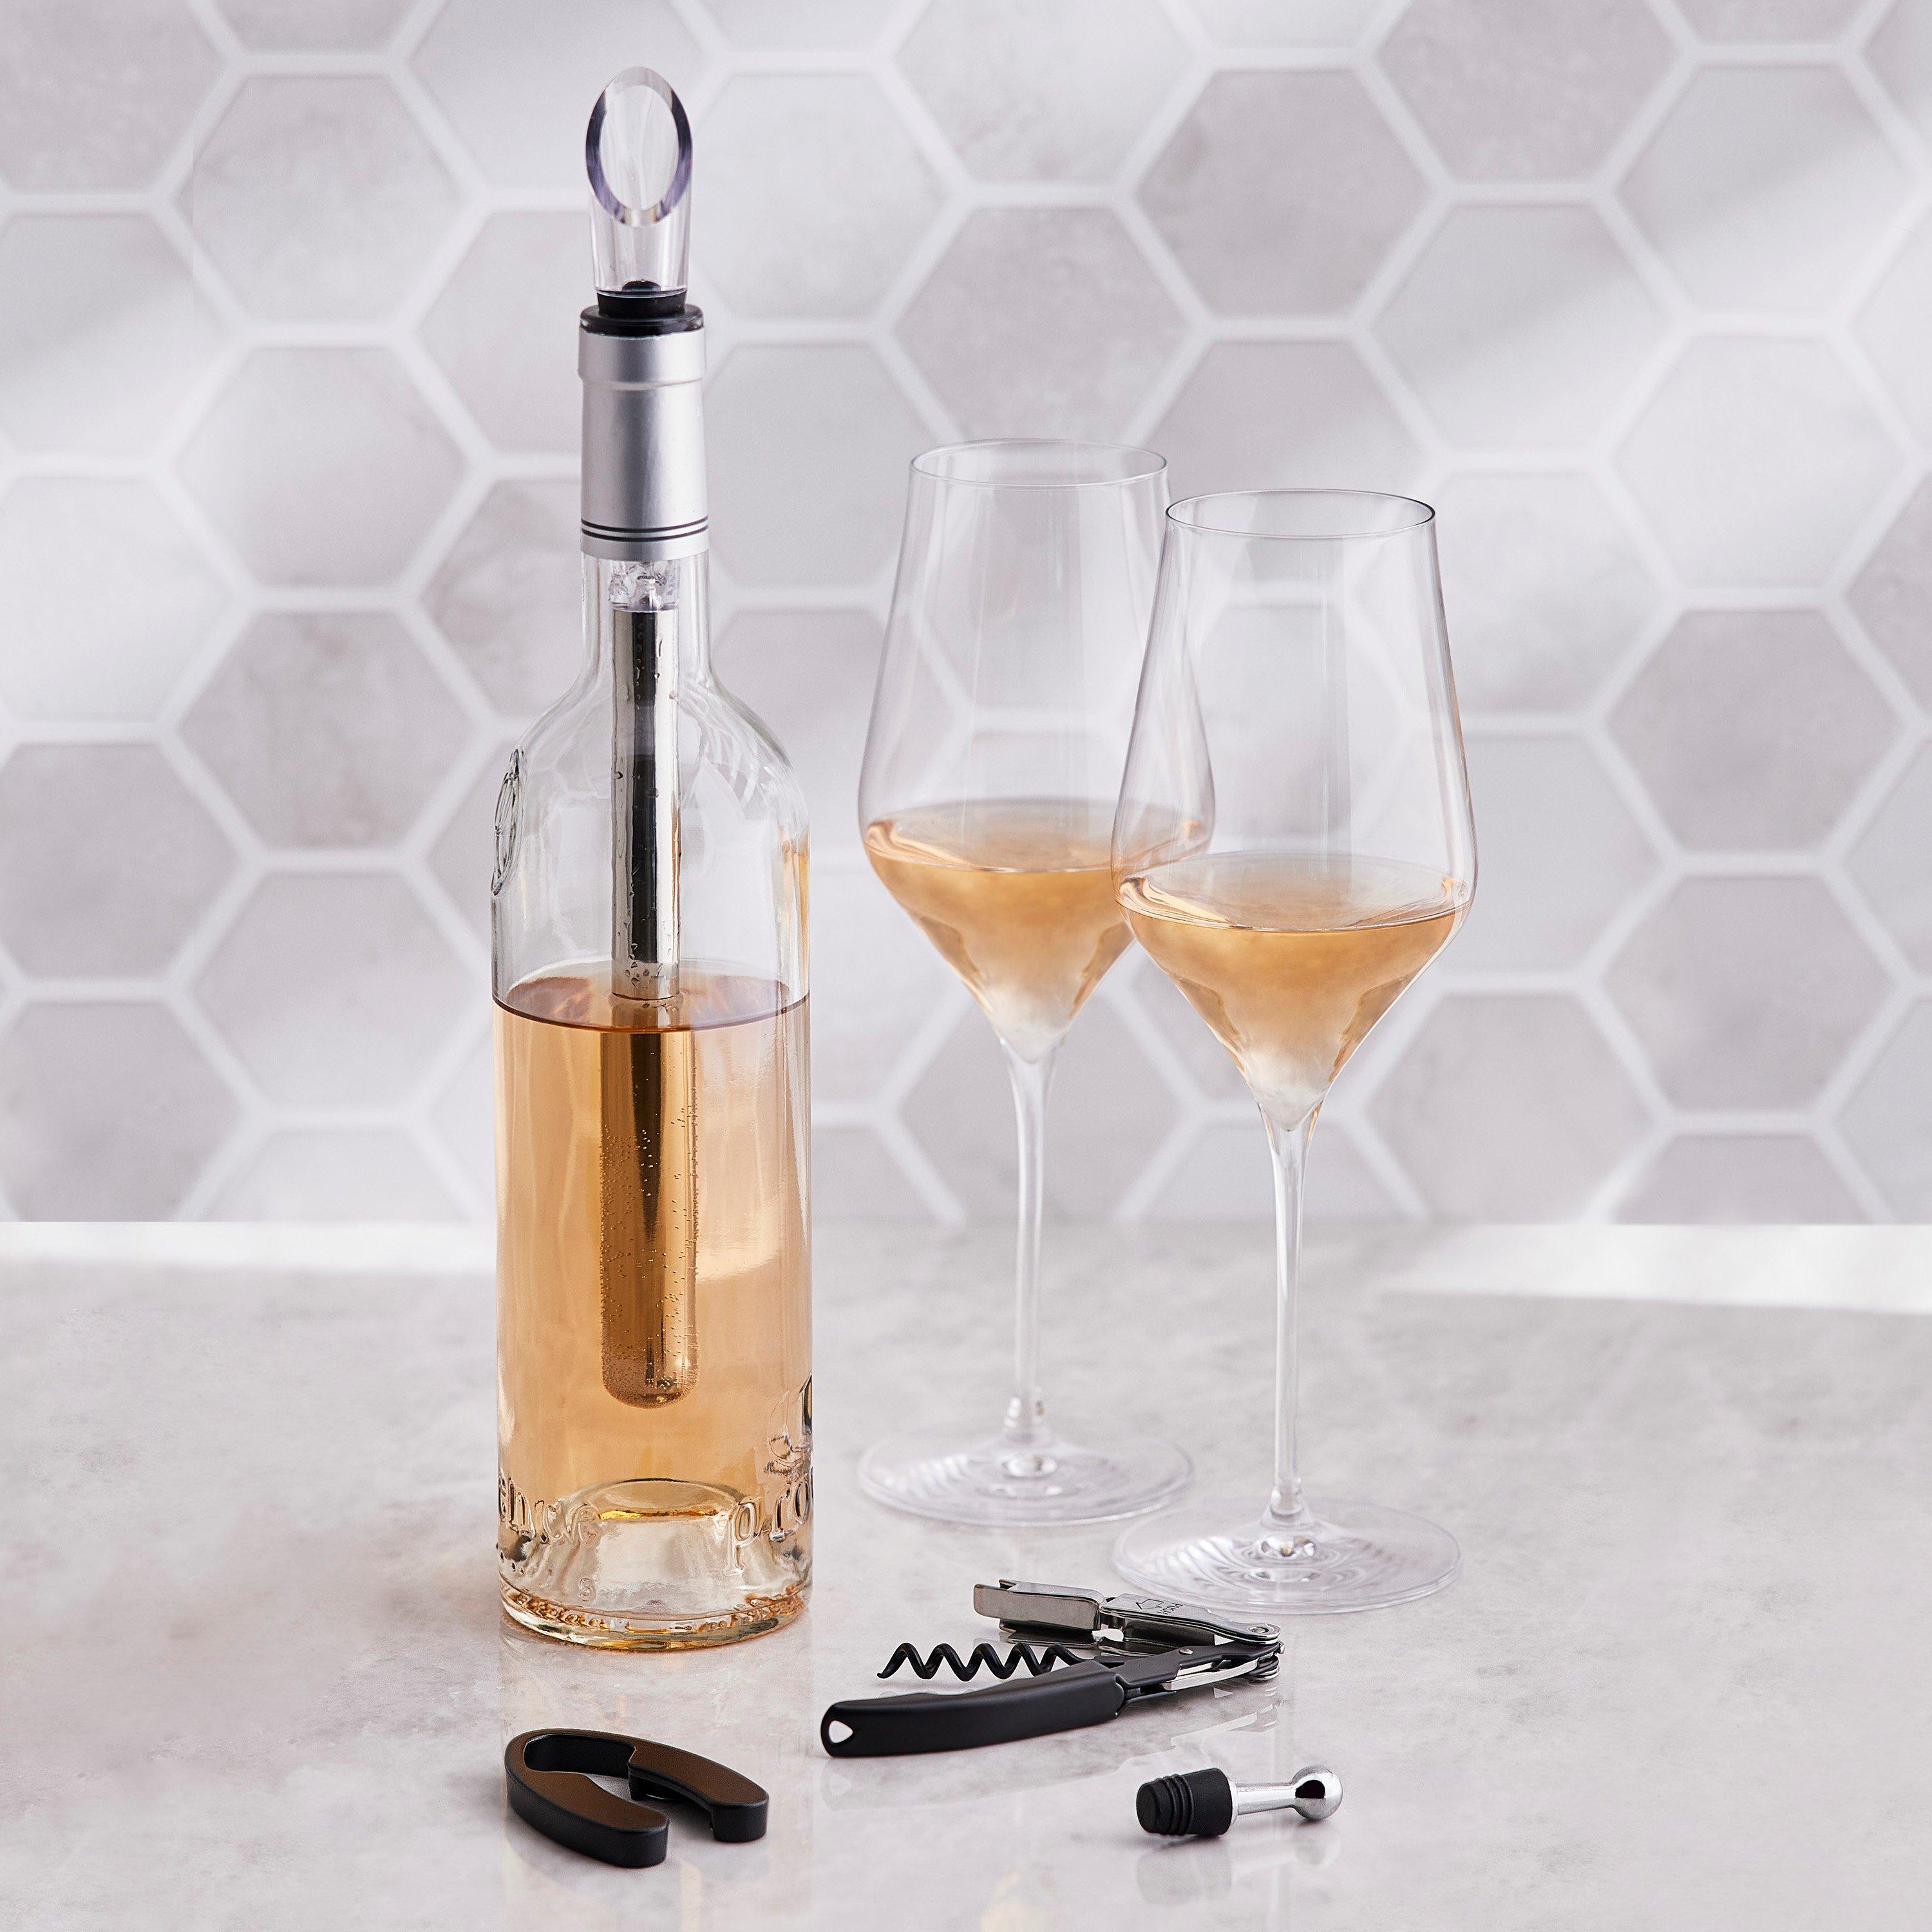 Beverage Chilling Ice Molds : Chilled Wine Bottles